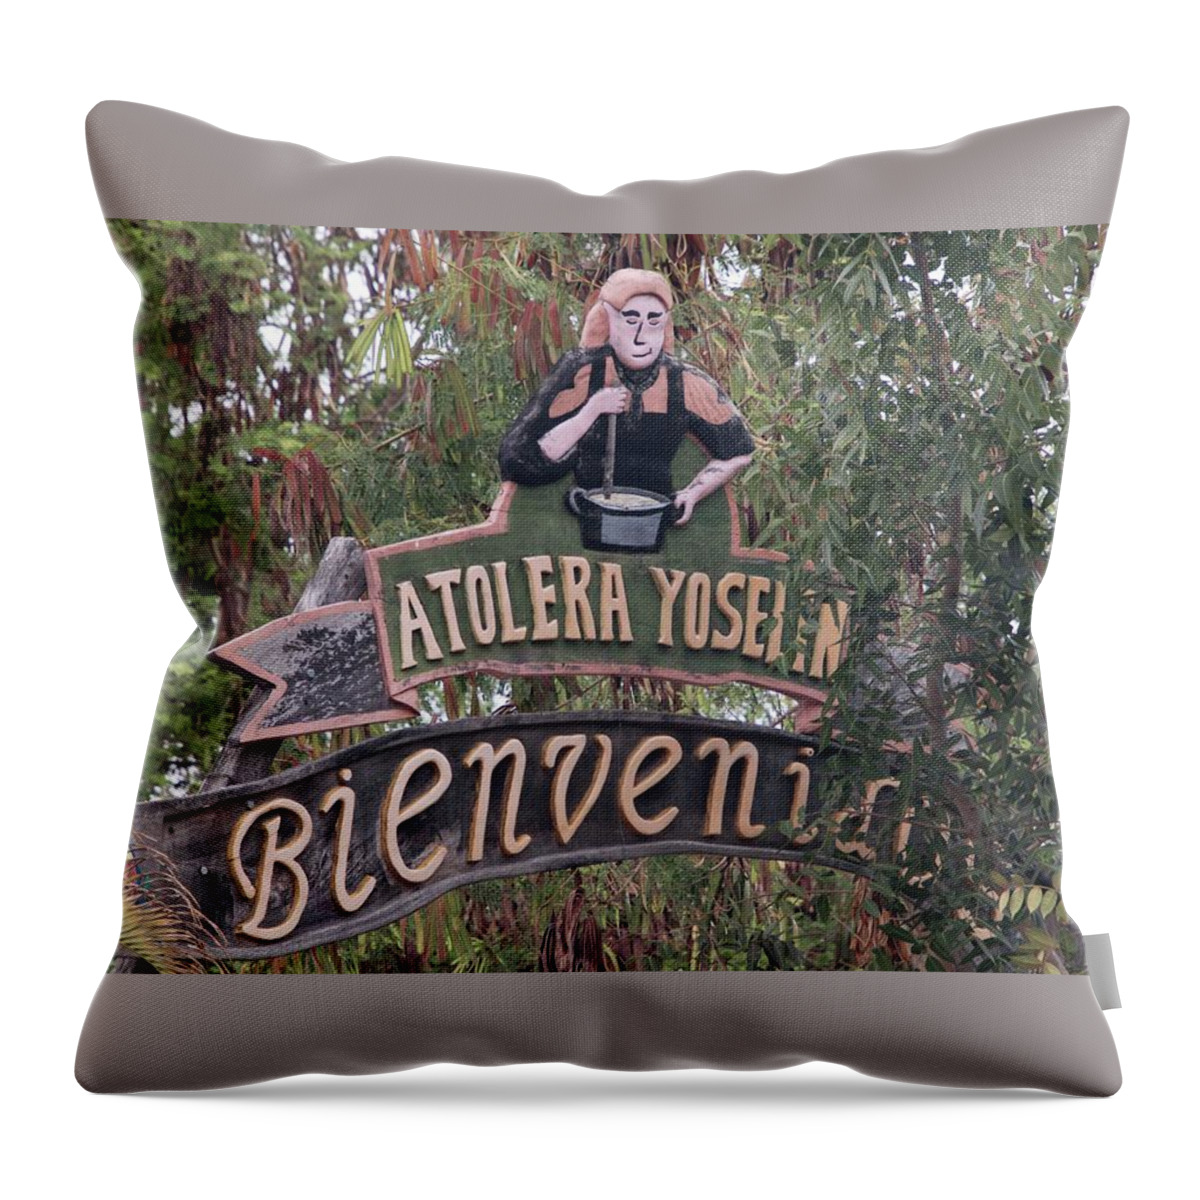 Sign Throw Pillow featuring the photograph Atolera Yoselin - 1 by Hany J